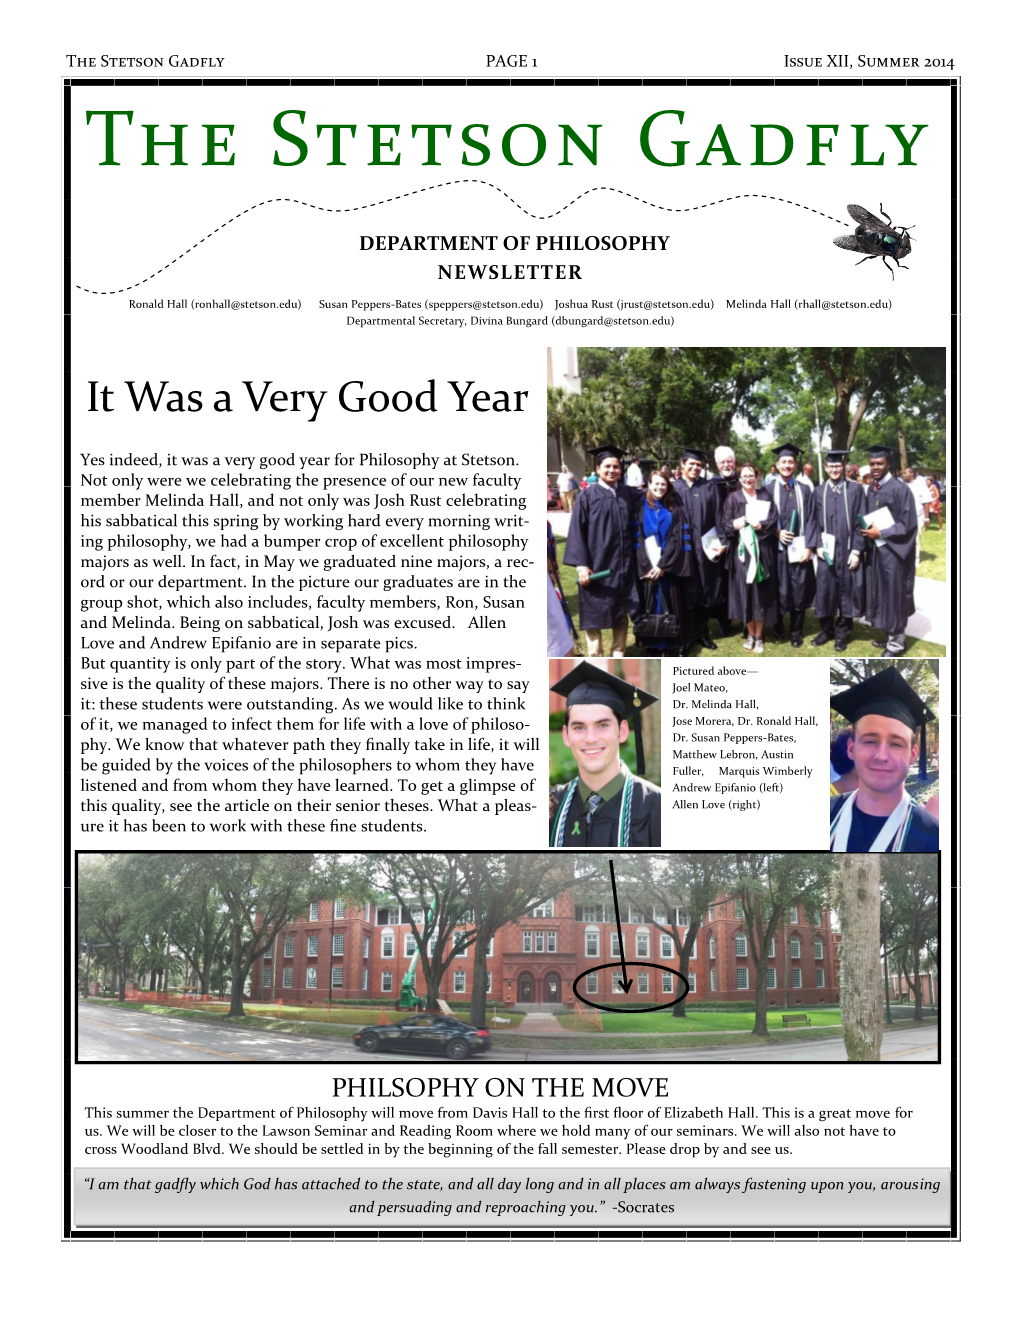 The Stetson Gadfly PAGE 1 Issue XII, Summer 2014 the Stetson Gadfly